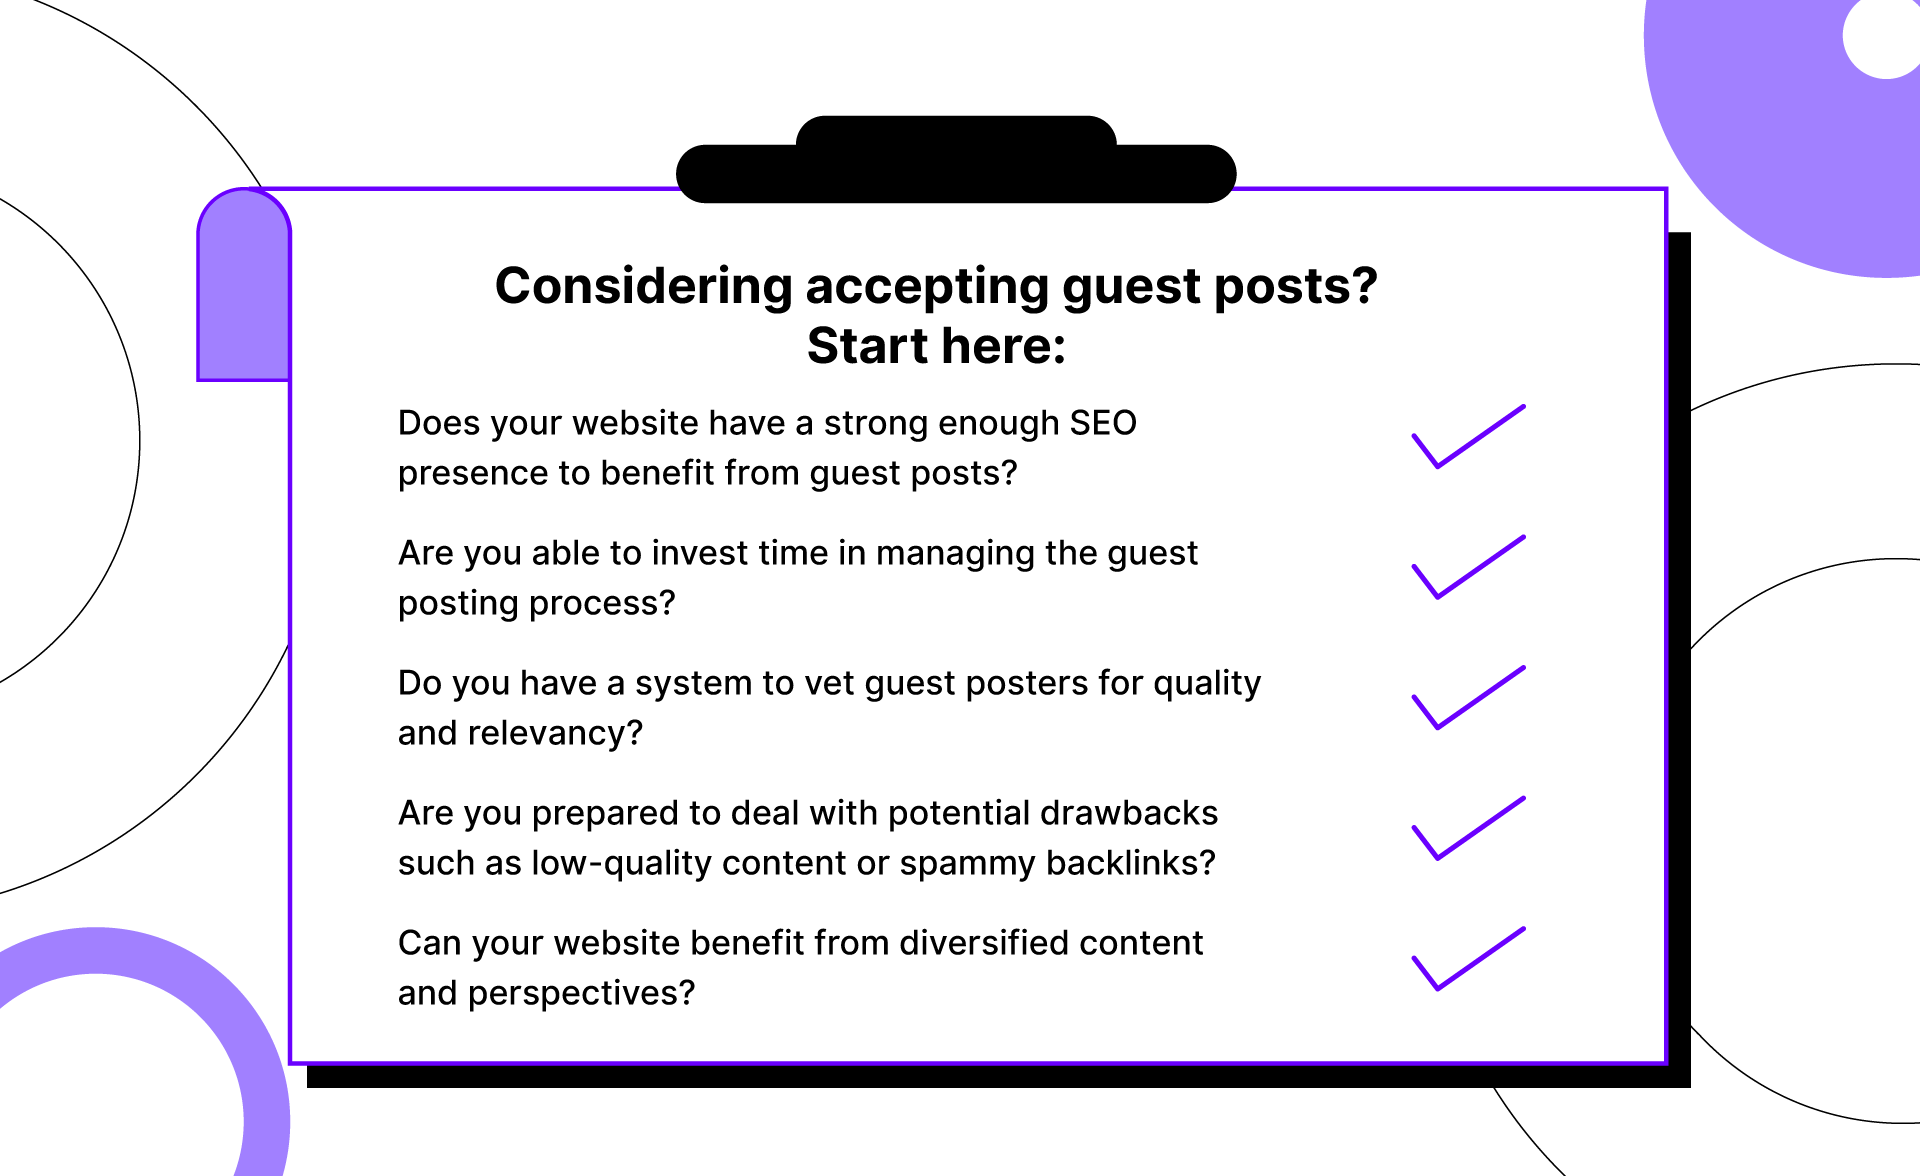 These are the factors you should consider when accepting guest posts. 